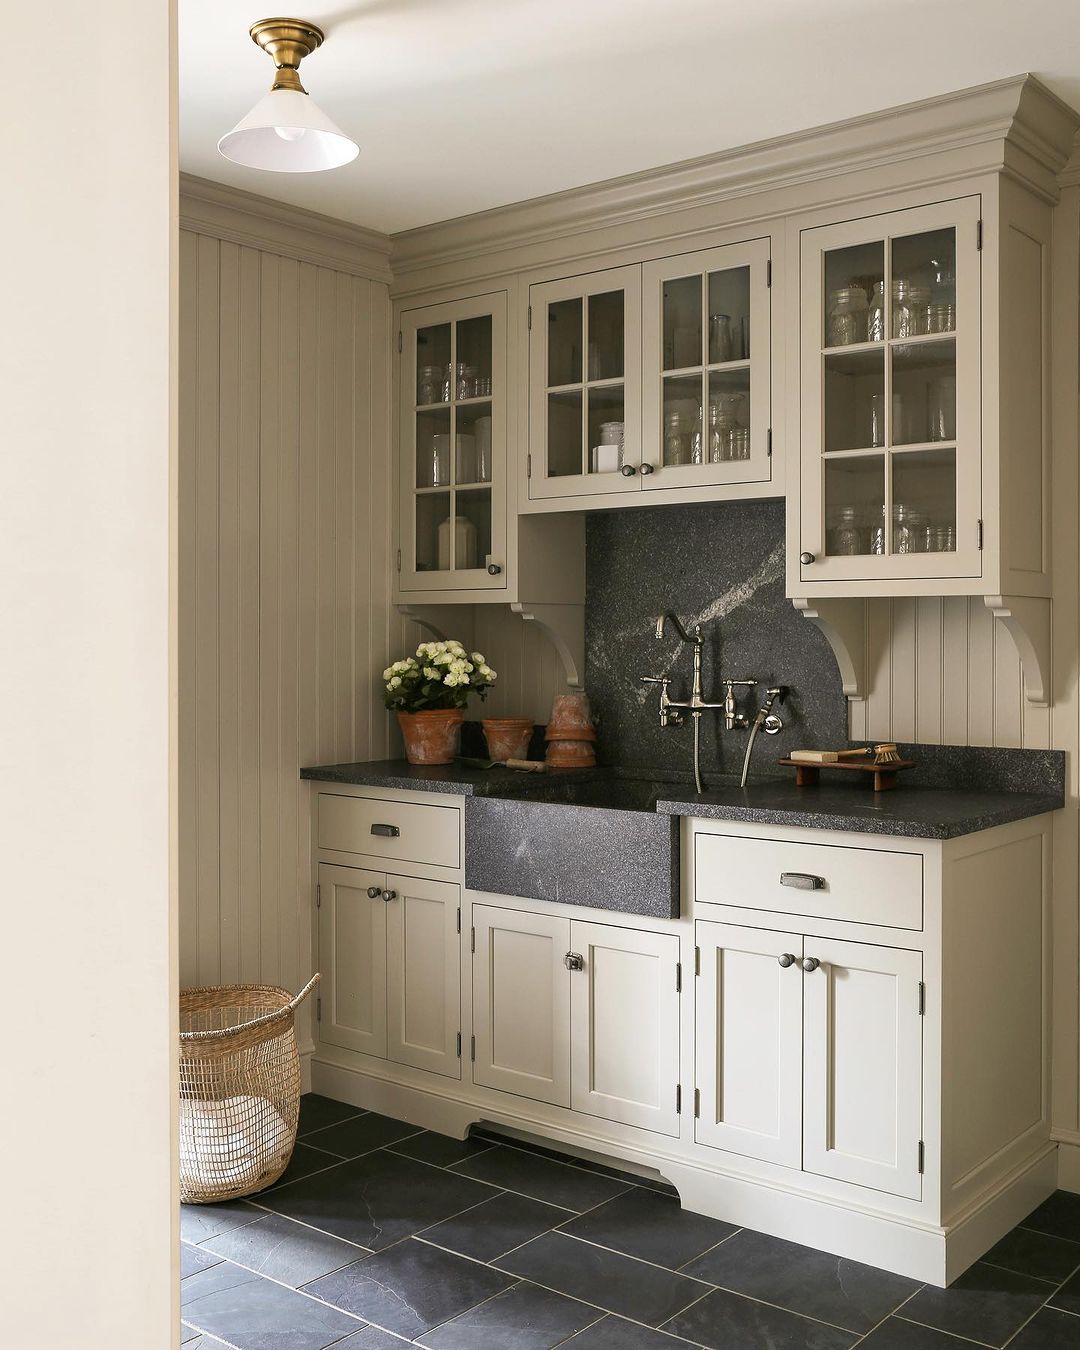 Classic Cottage Appeal: Shaker Cabinets with Dark Countertops